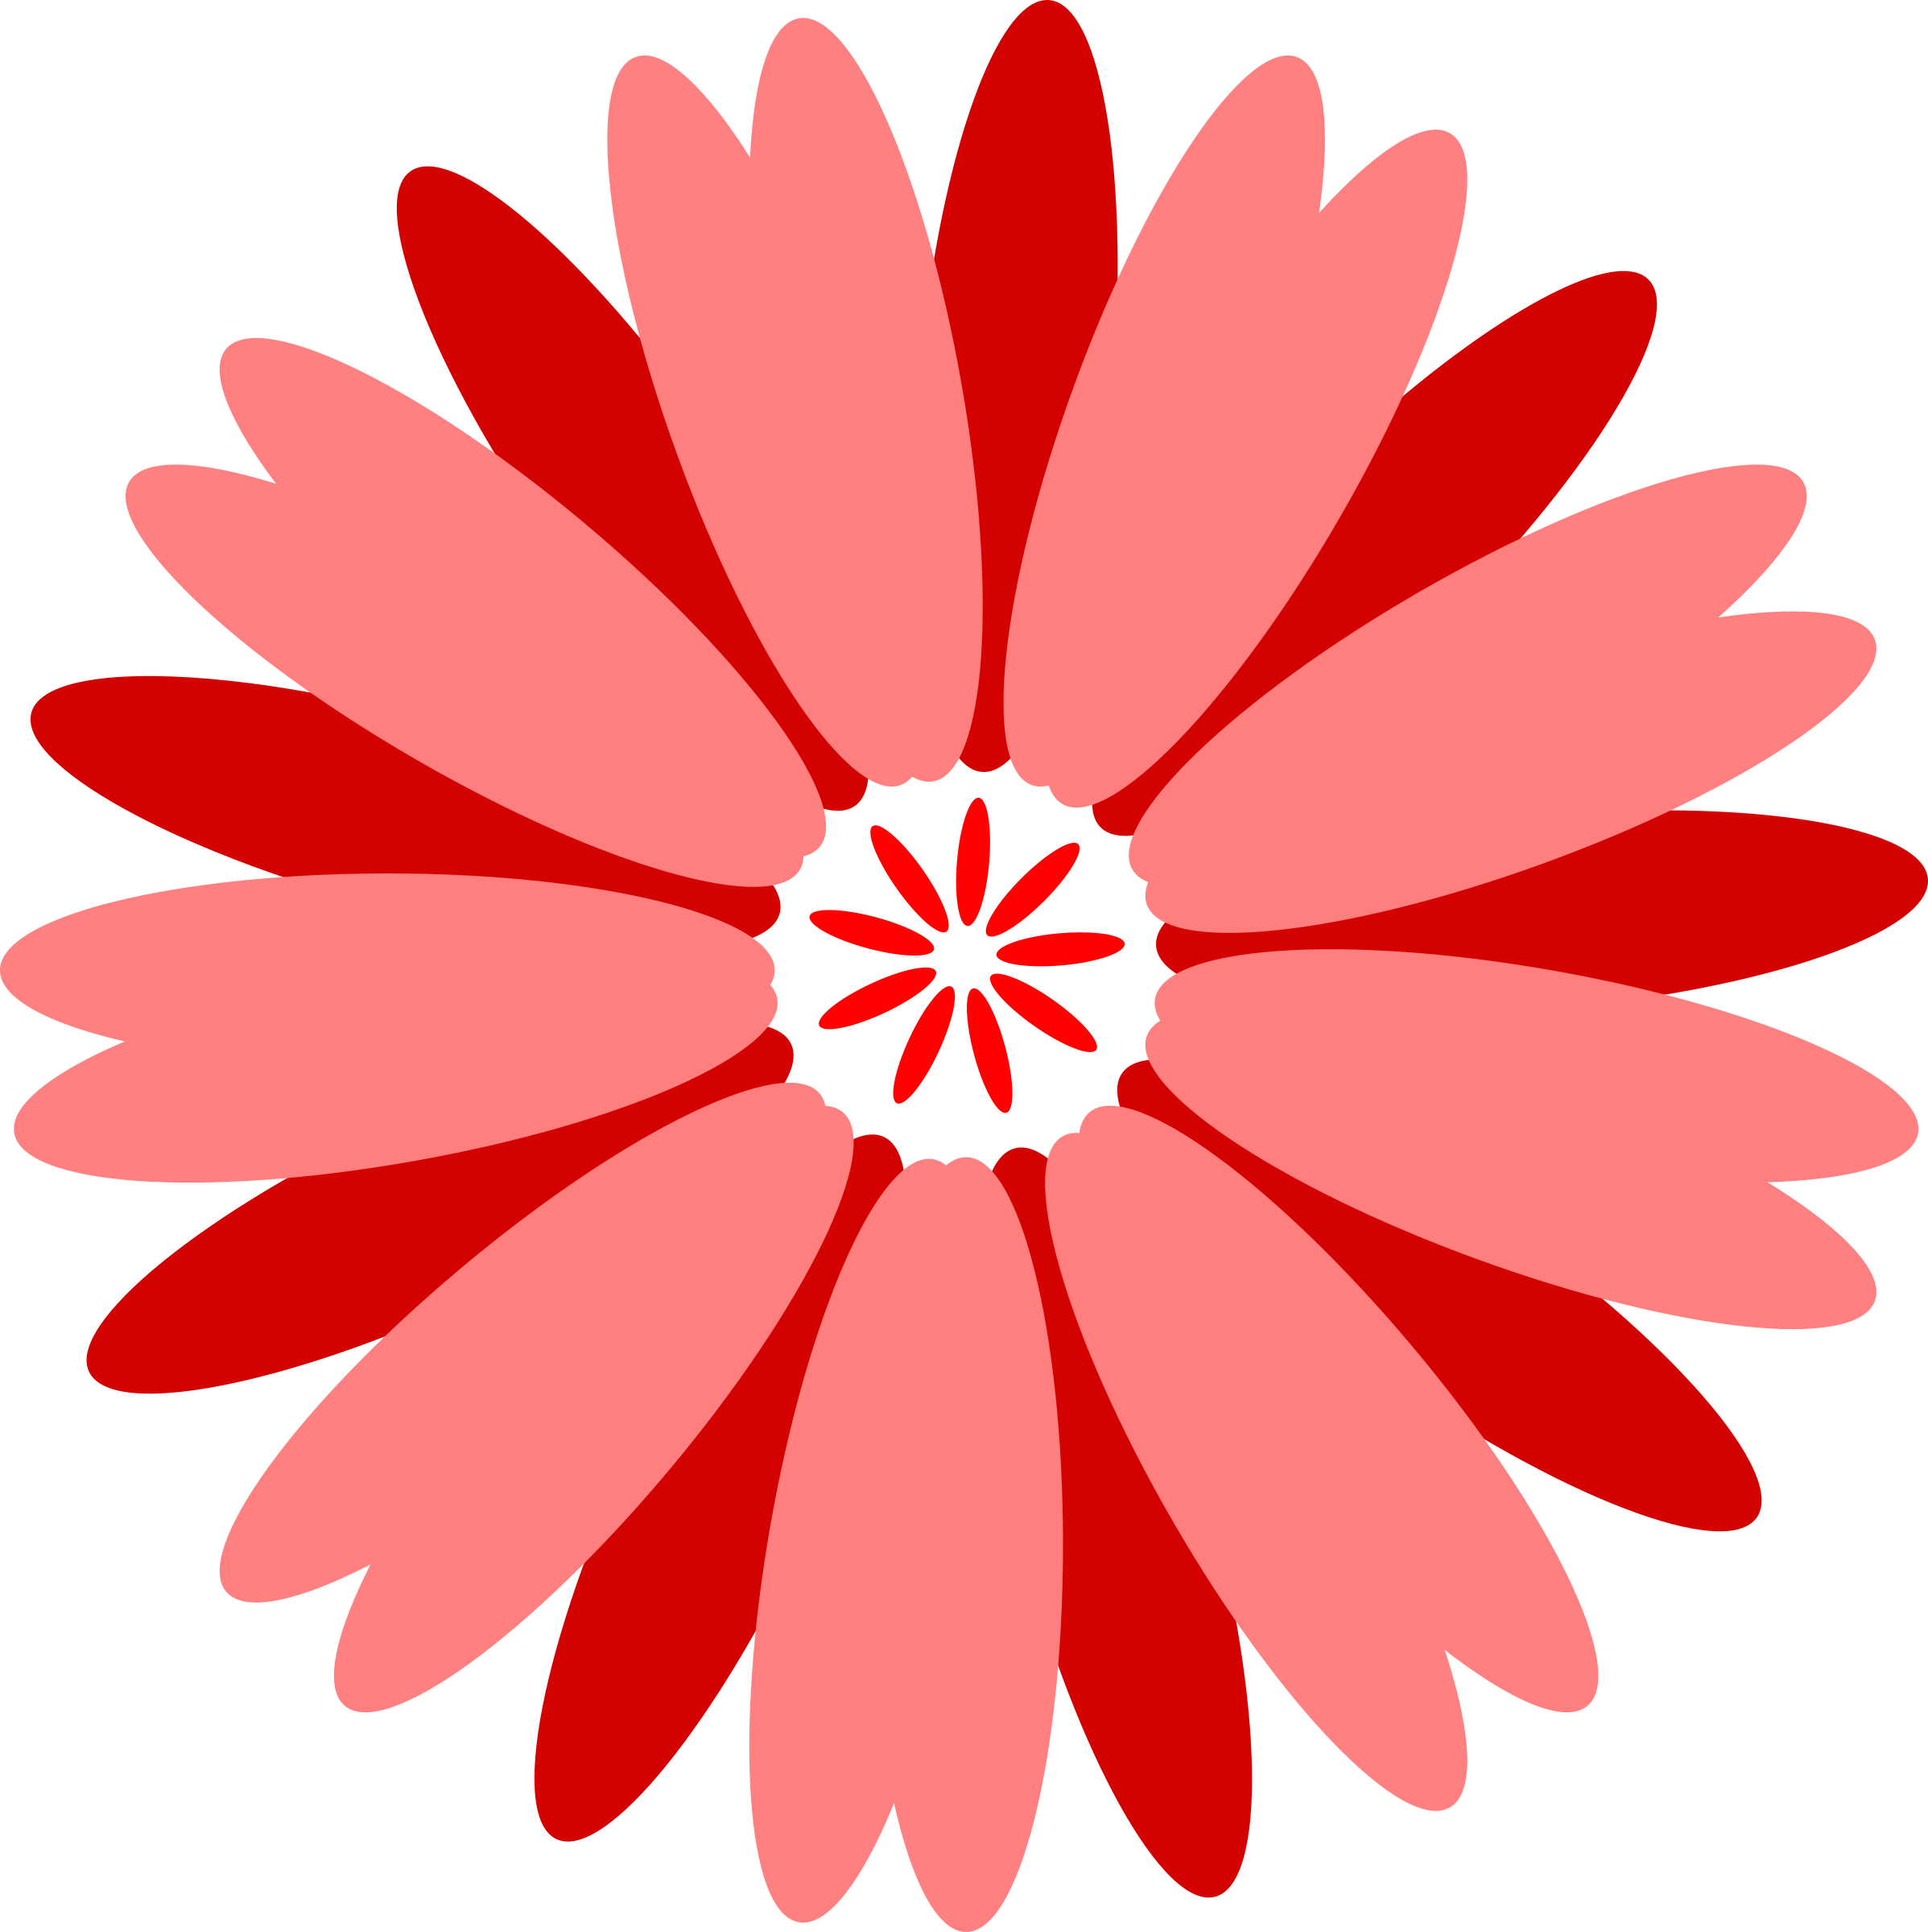 Red Flower Clipart Fower - Flower Images For Design (2395x2400)